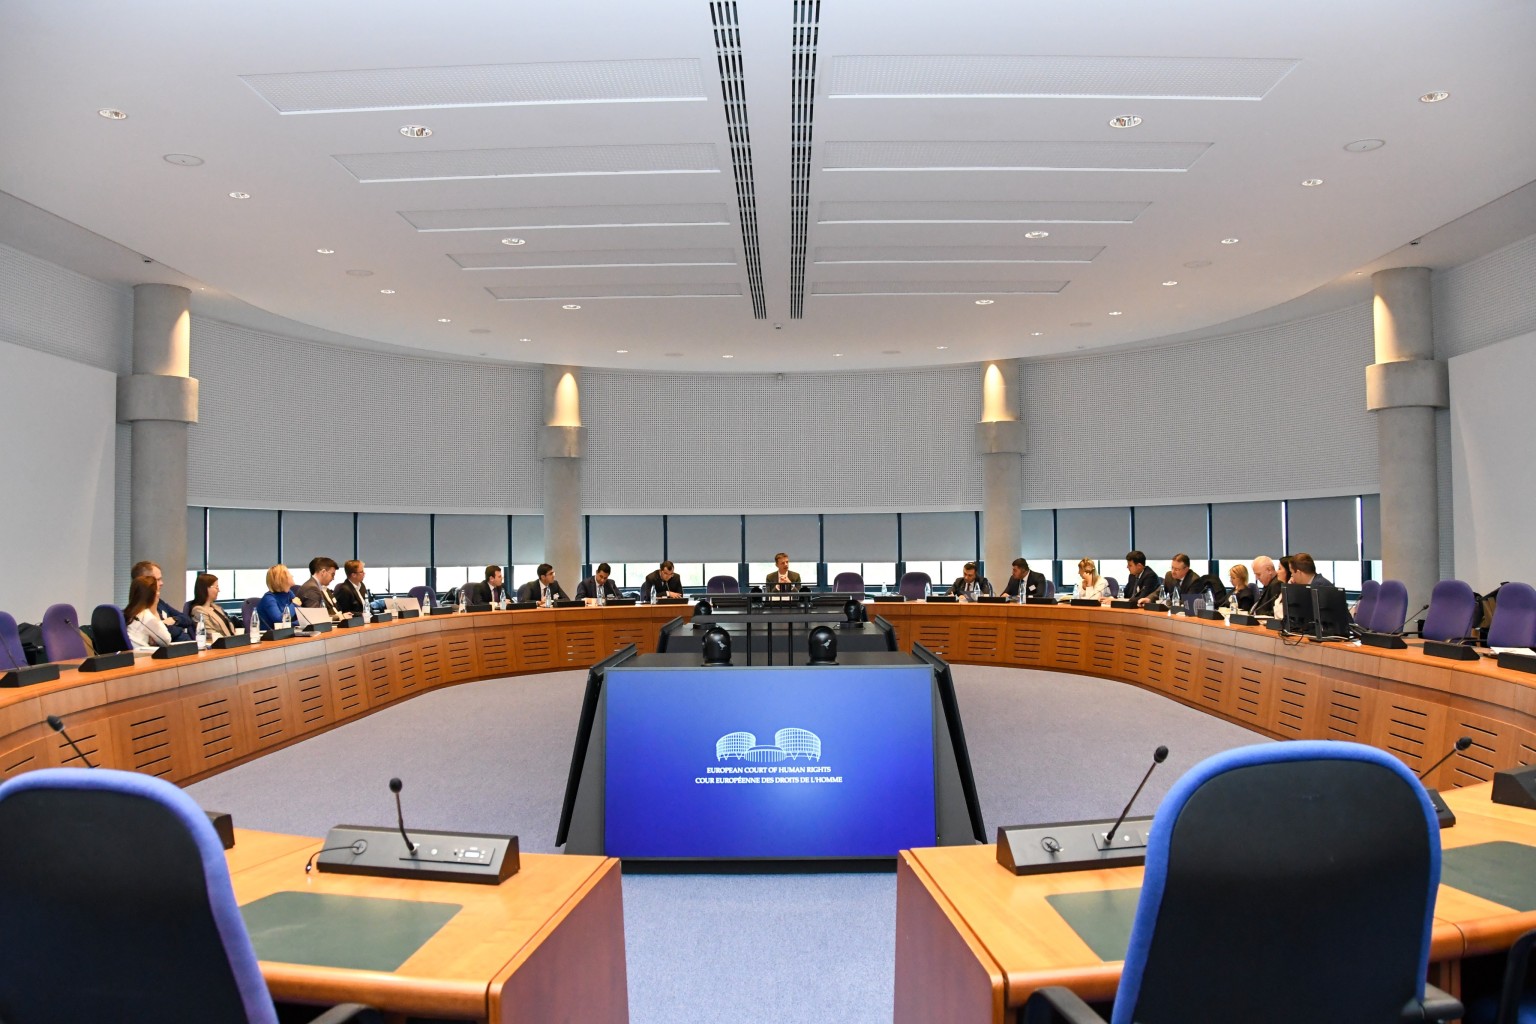 Staff members of the Supreme Court visited the European Court of Human Rights